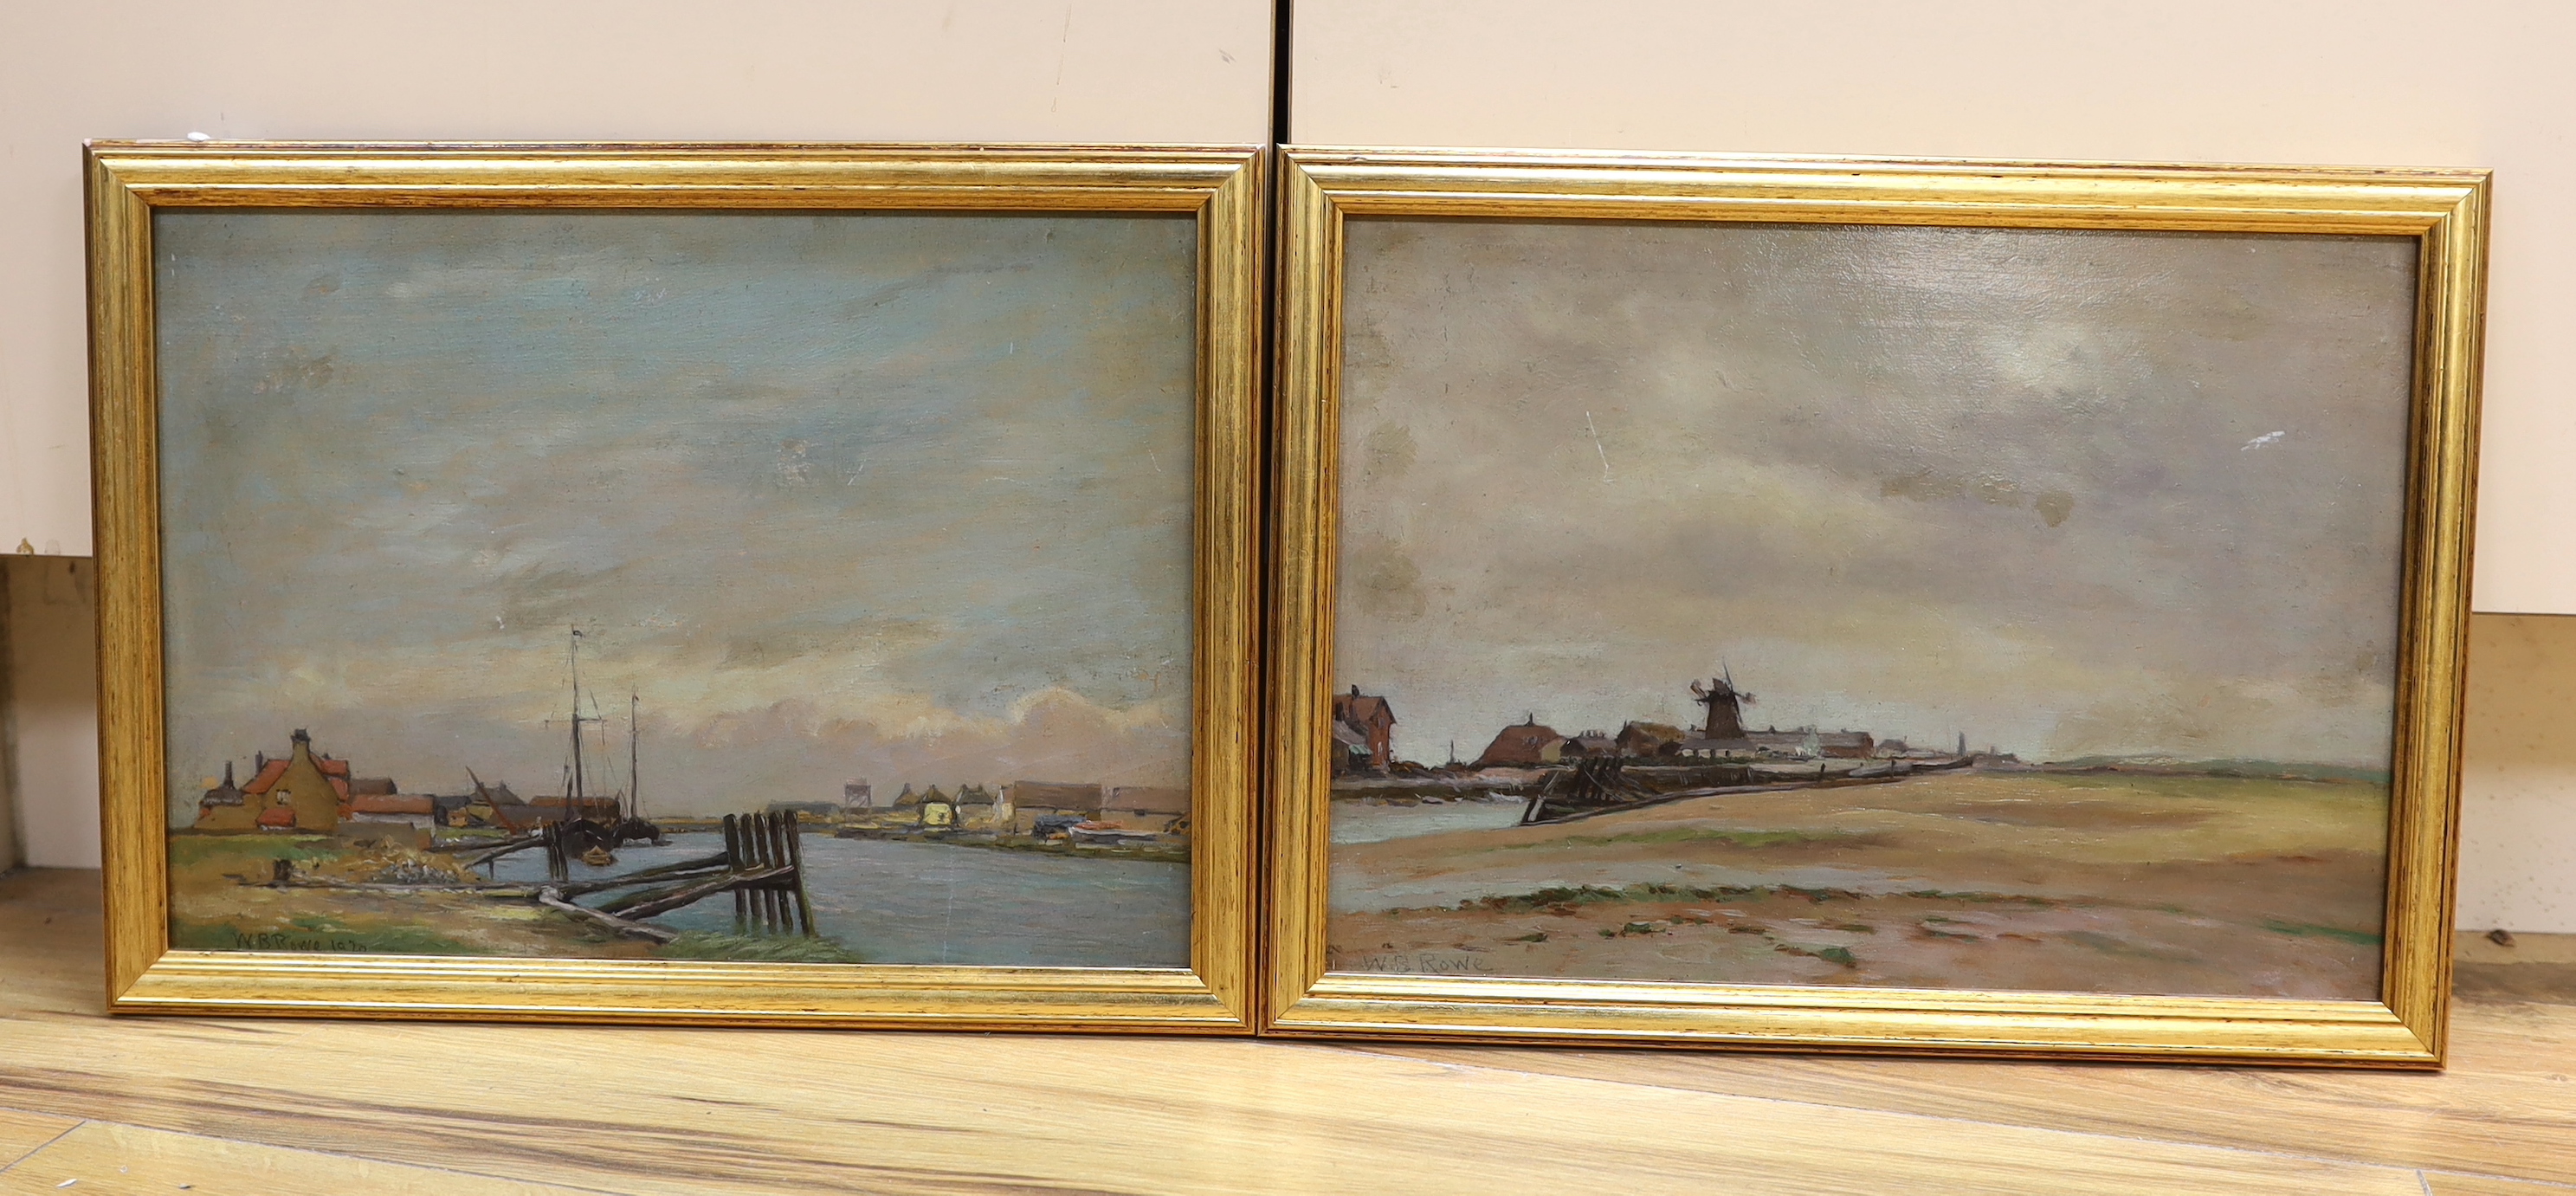 W B Rowe (1910-1955) pair of oils on board, Adur at Littlehampton, each signed, one dated 1920, 25 x 35cm